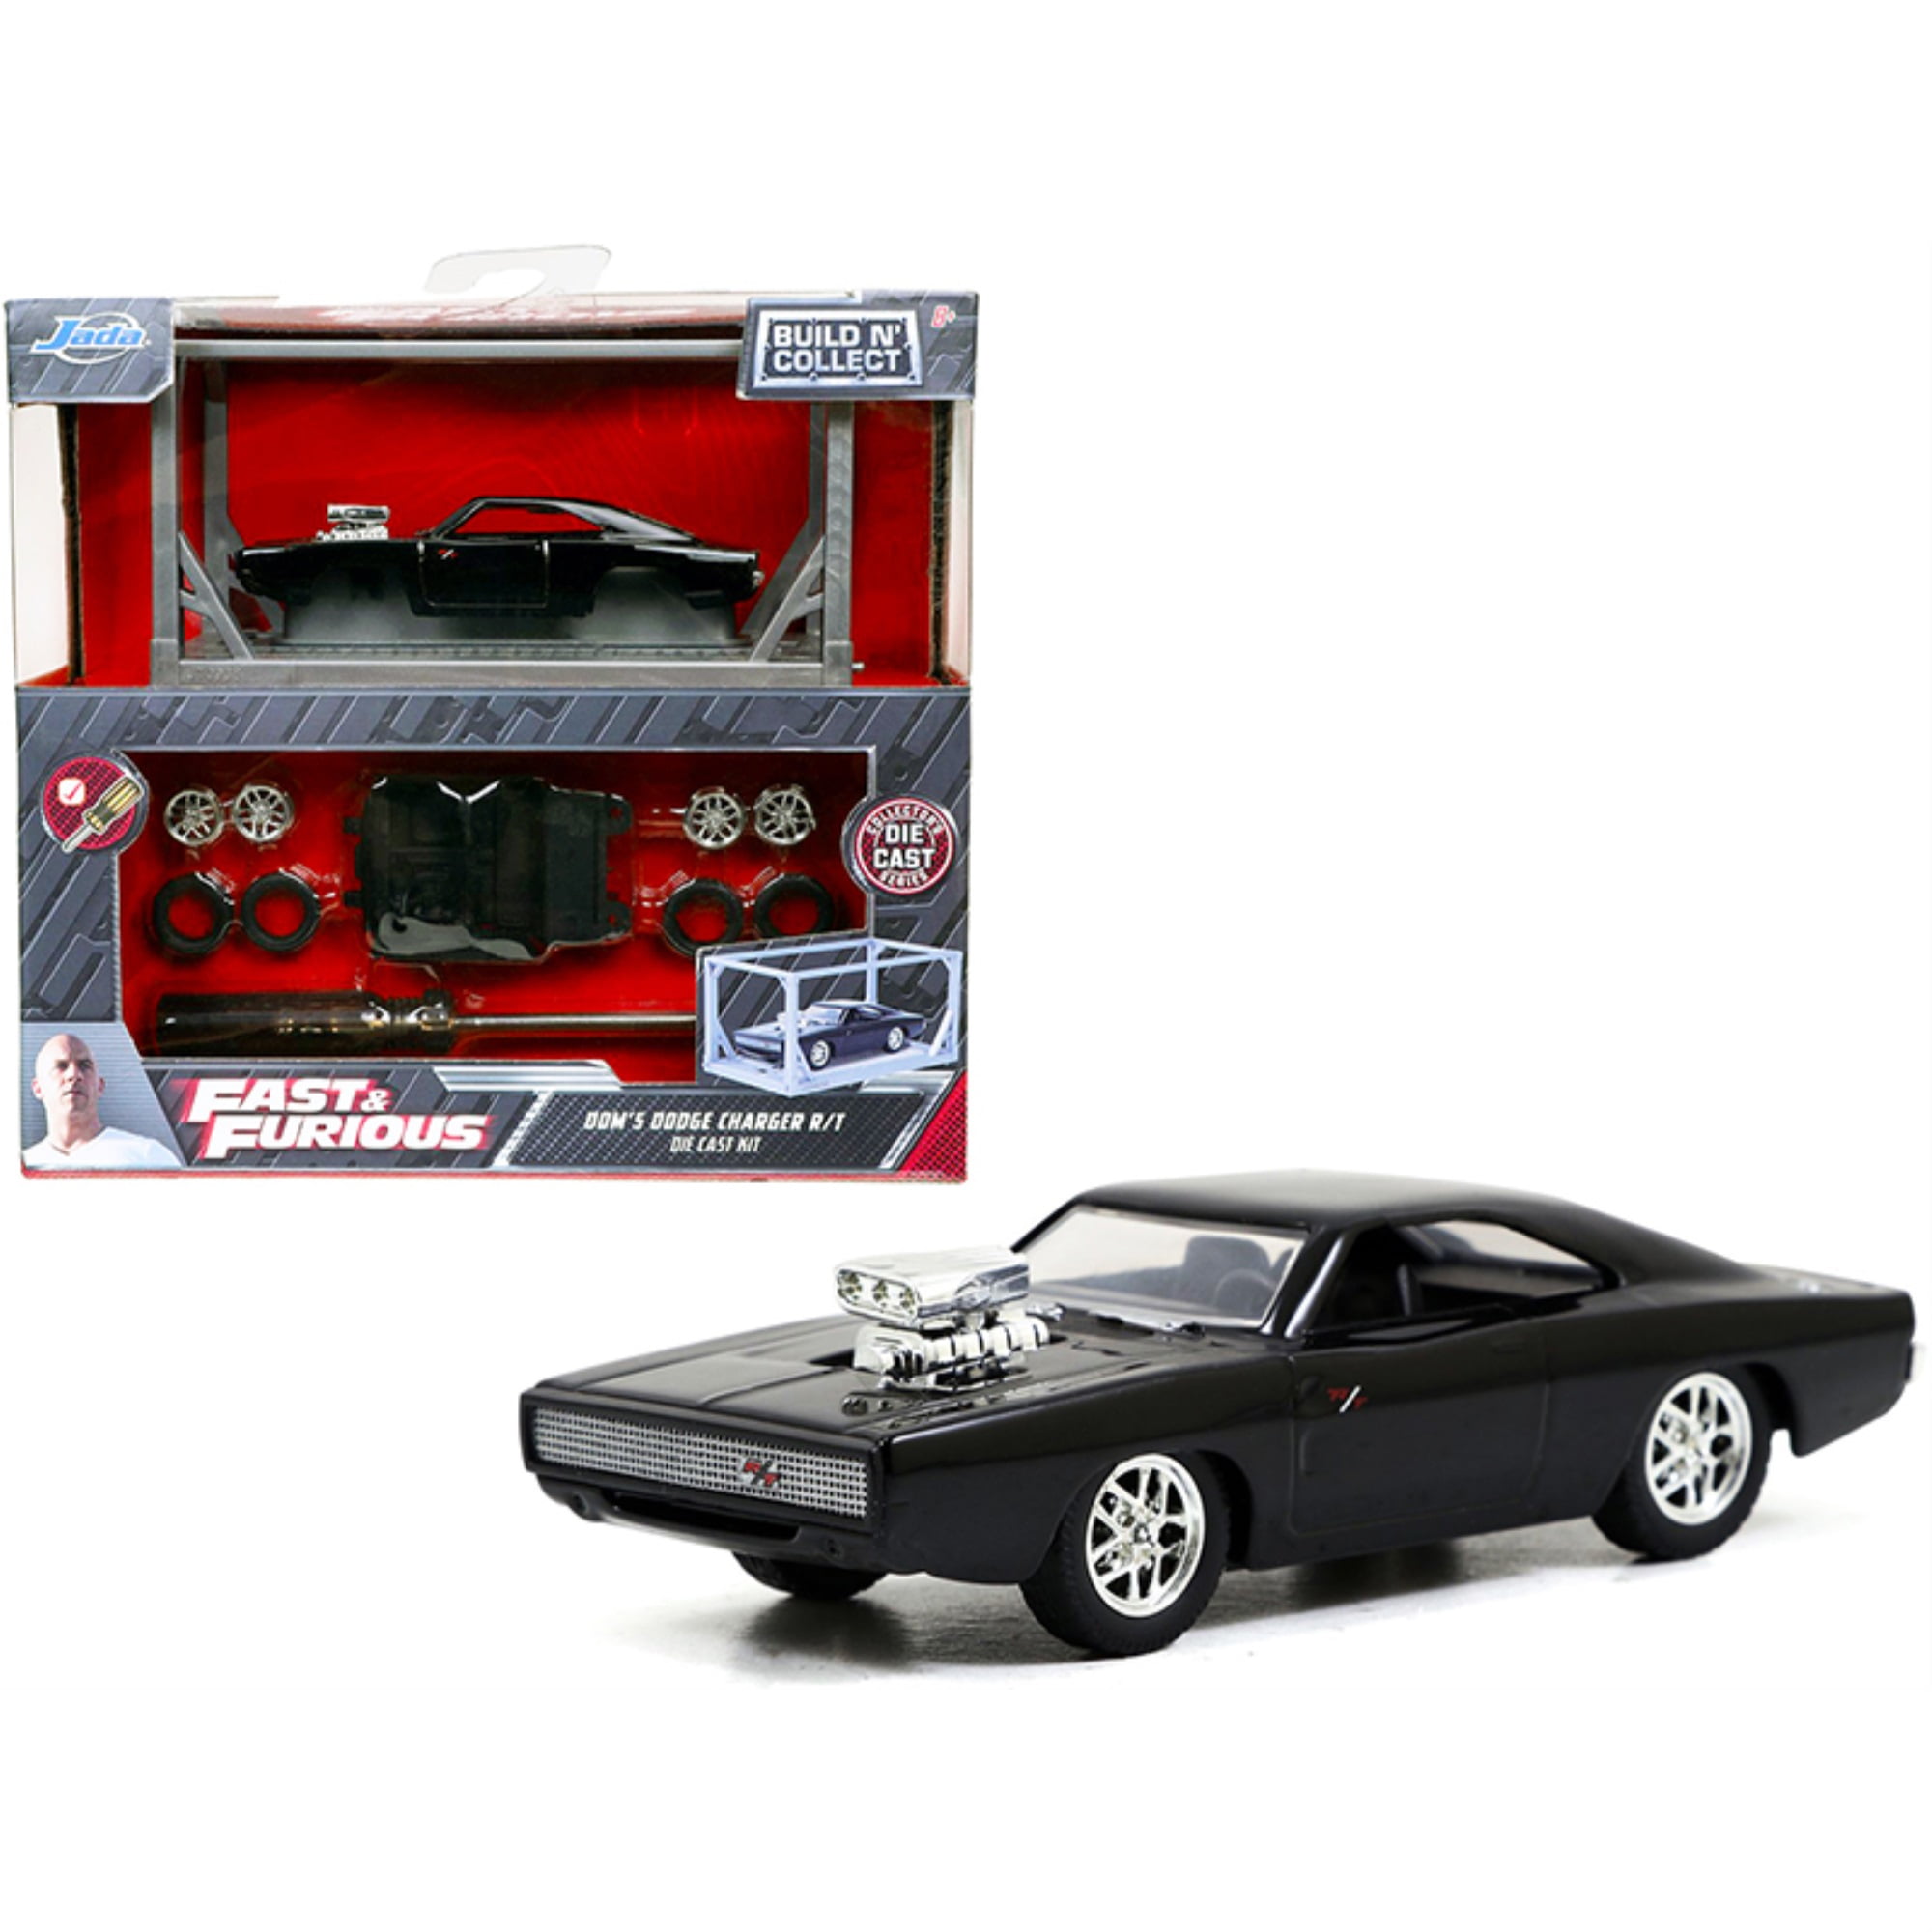 Fast and Furious Doms Dodge Charger R/T 1:32 Scale Jada 97042 